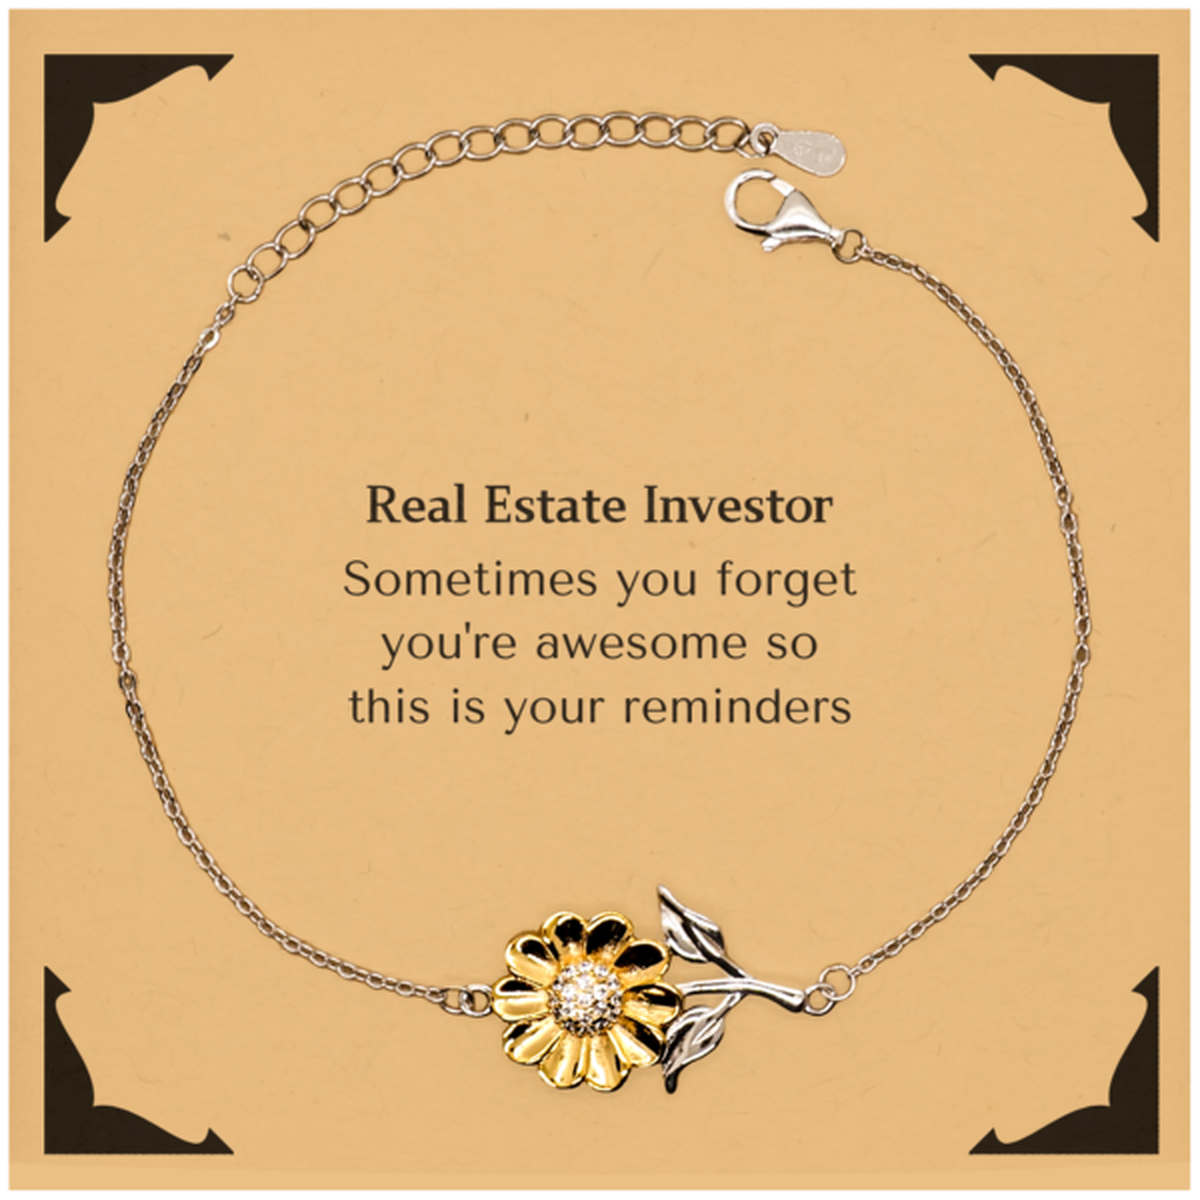 Sentimental Real Estate Investor Sunflower Bracelet, Real Estate Investor Sometimes you forget you're awesome so this is your reminders, Graduation Christmas Birthday Gifts for Real Estate Investor, Men, Women, Coworkers